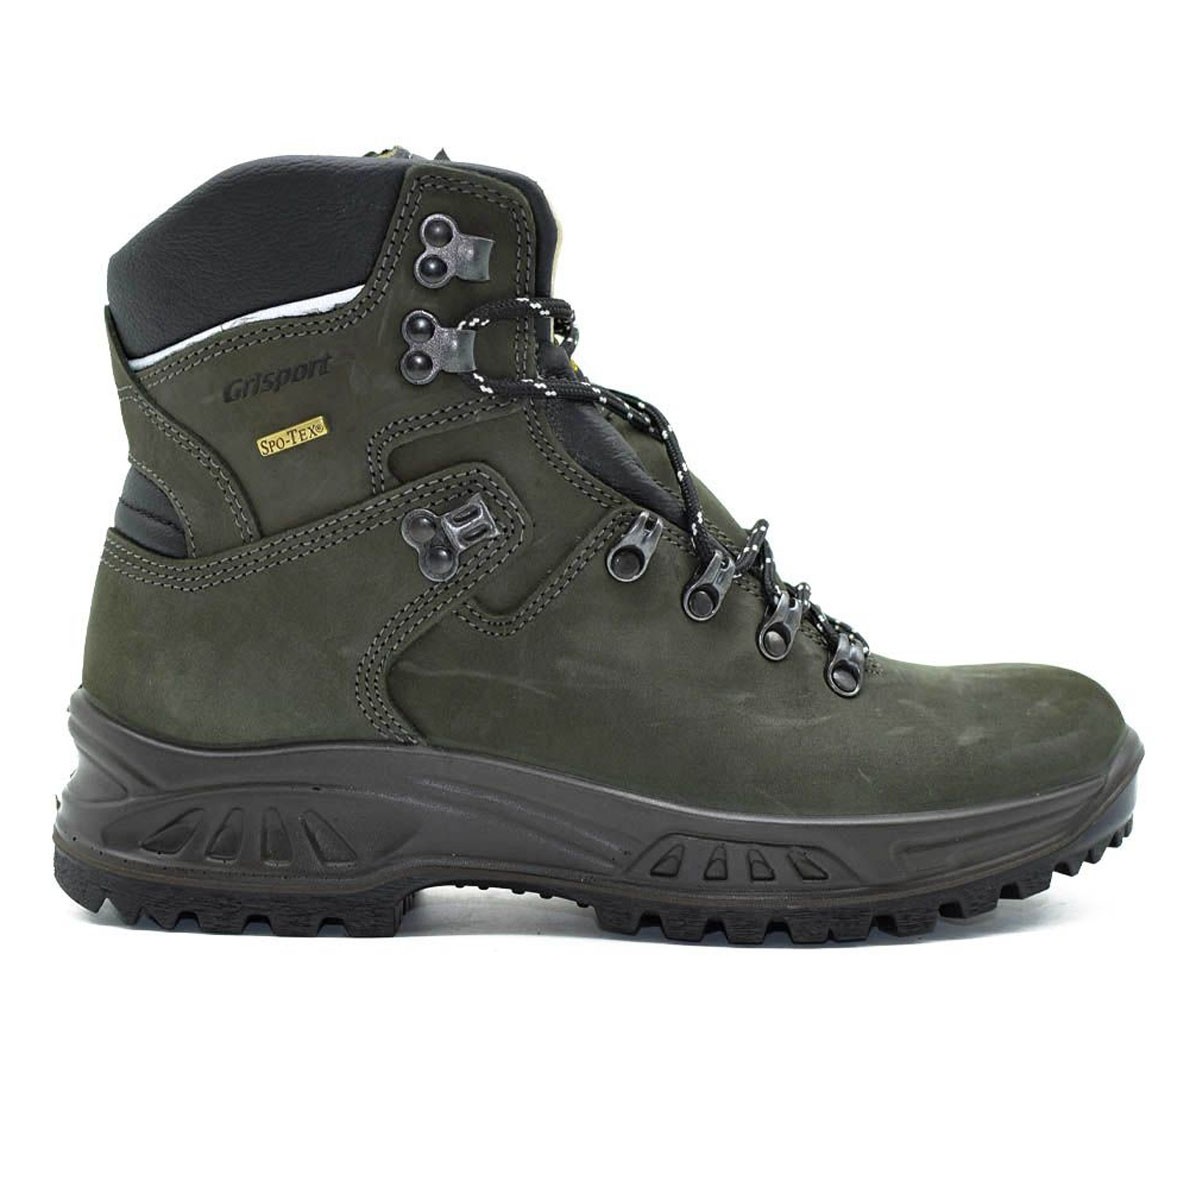 12427 MEN'S HIKING BOOTS